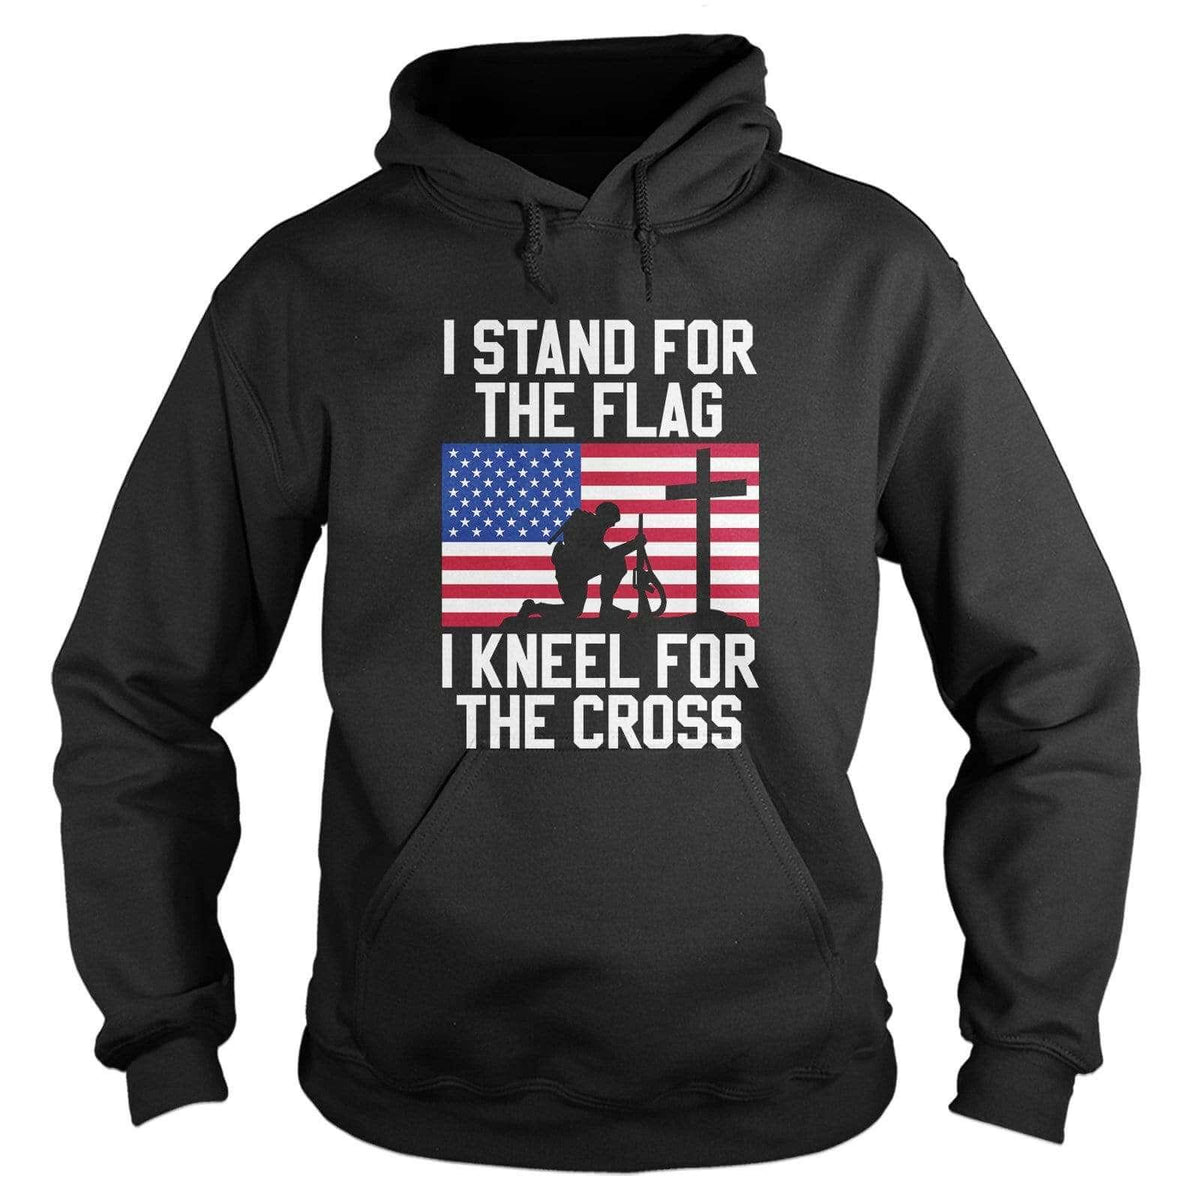 I Stand for the Flag Hoodie